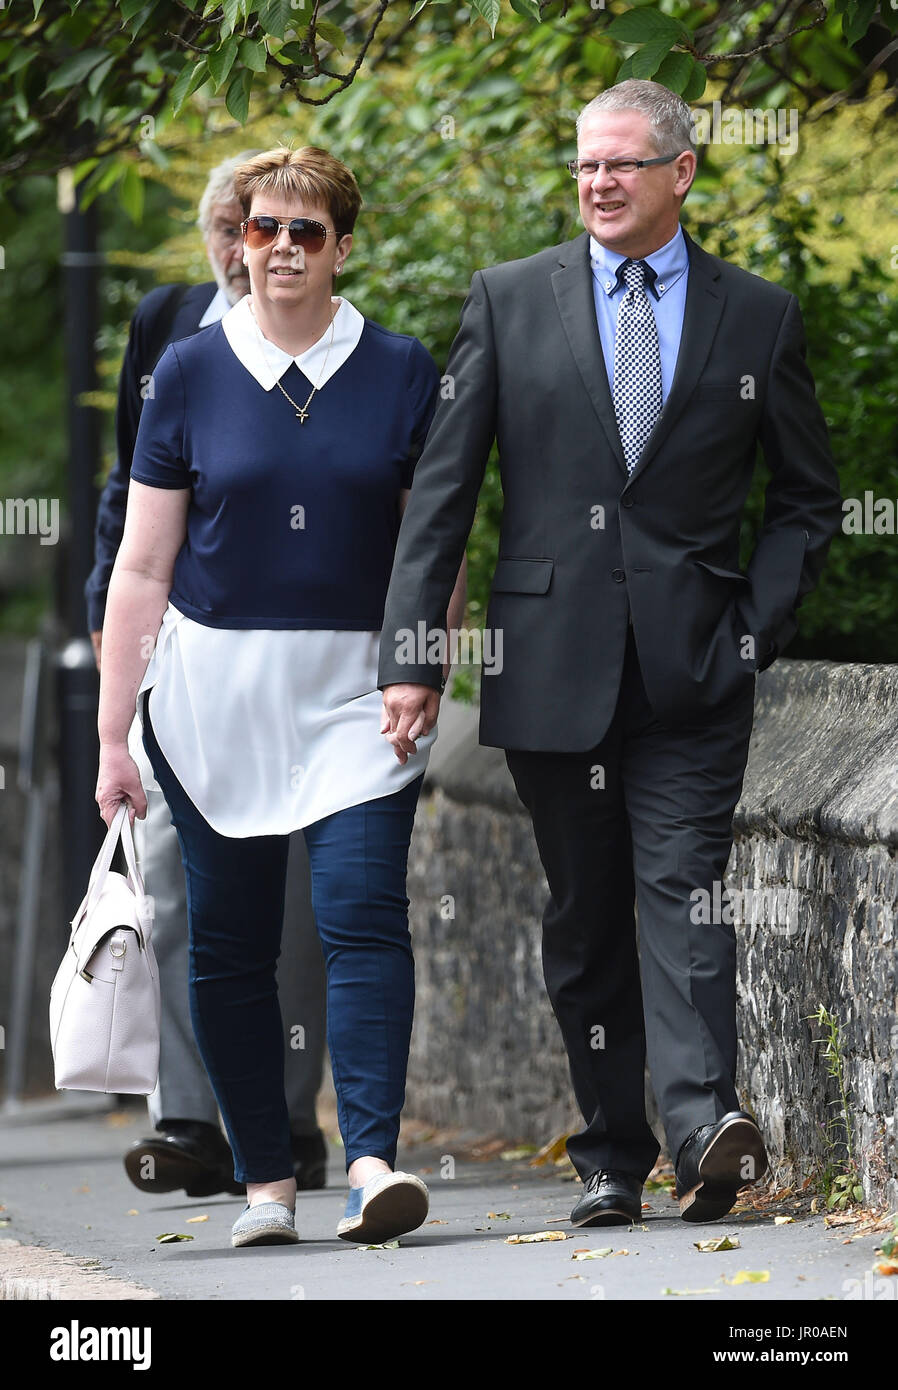 The Very Rev Martin Thrower, with his wife Pauline, arrives at Norwich Crown Court where he will be sentenced after admitting two counts of voyeurism at an earlier hearing. Stock Photo